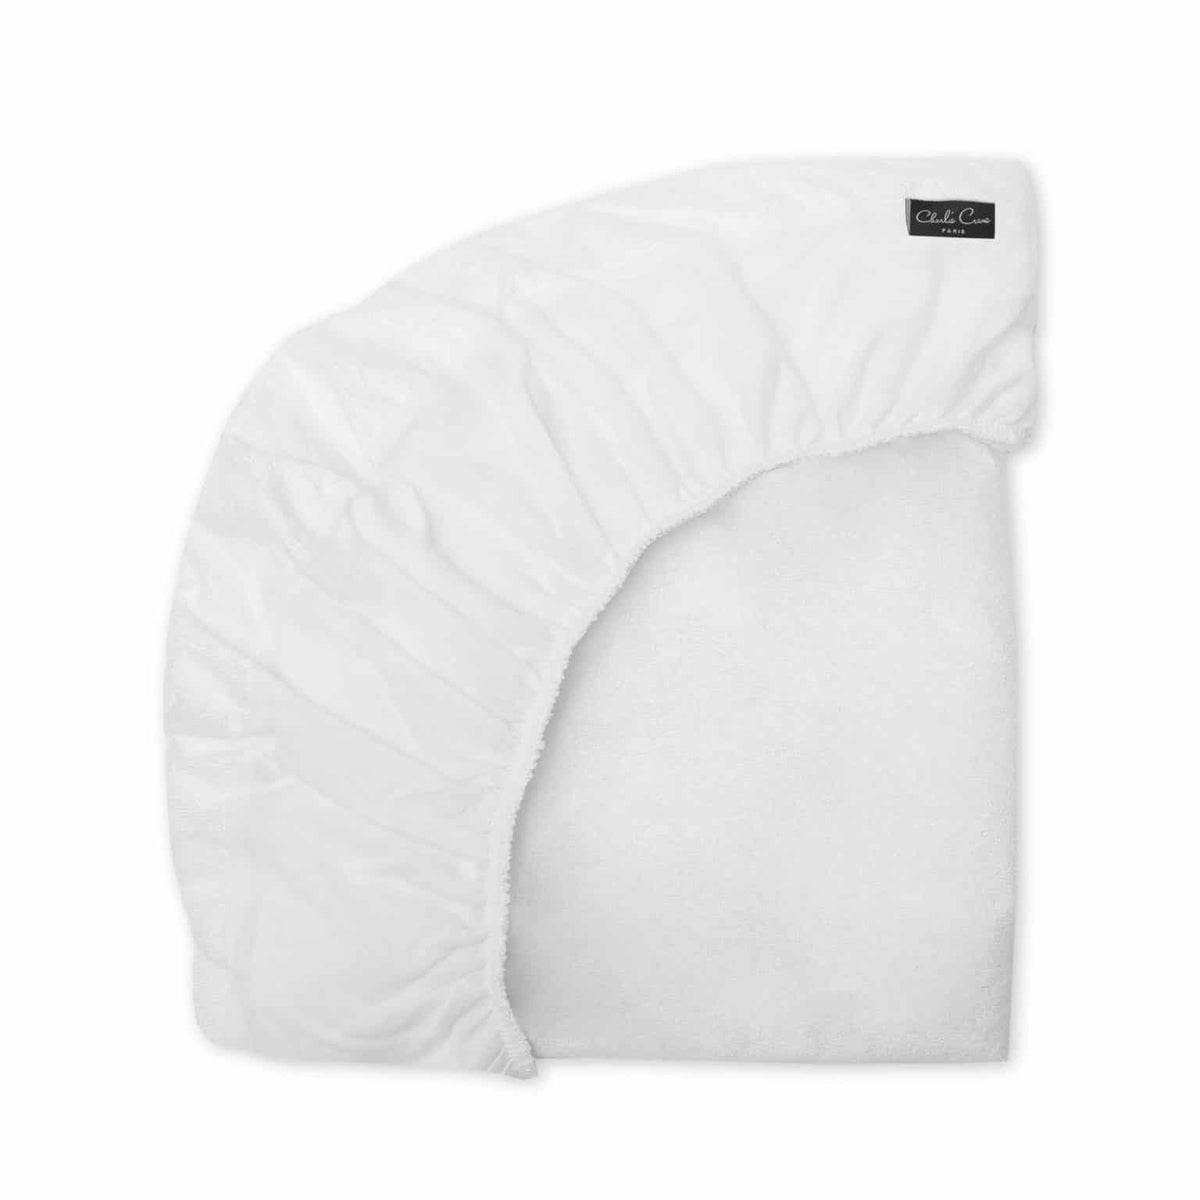 Mattress Protector for the KIMI Baby Bed by Charlie Crane - Maude Kids Decor